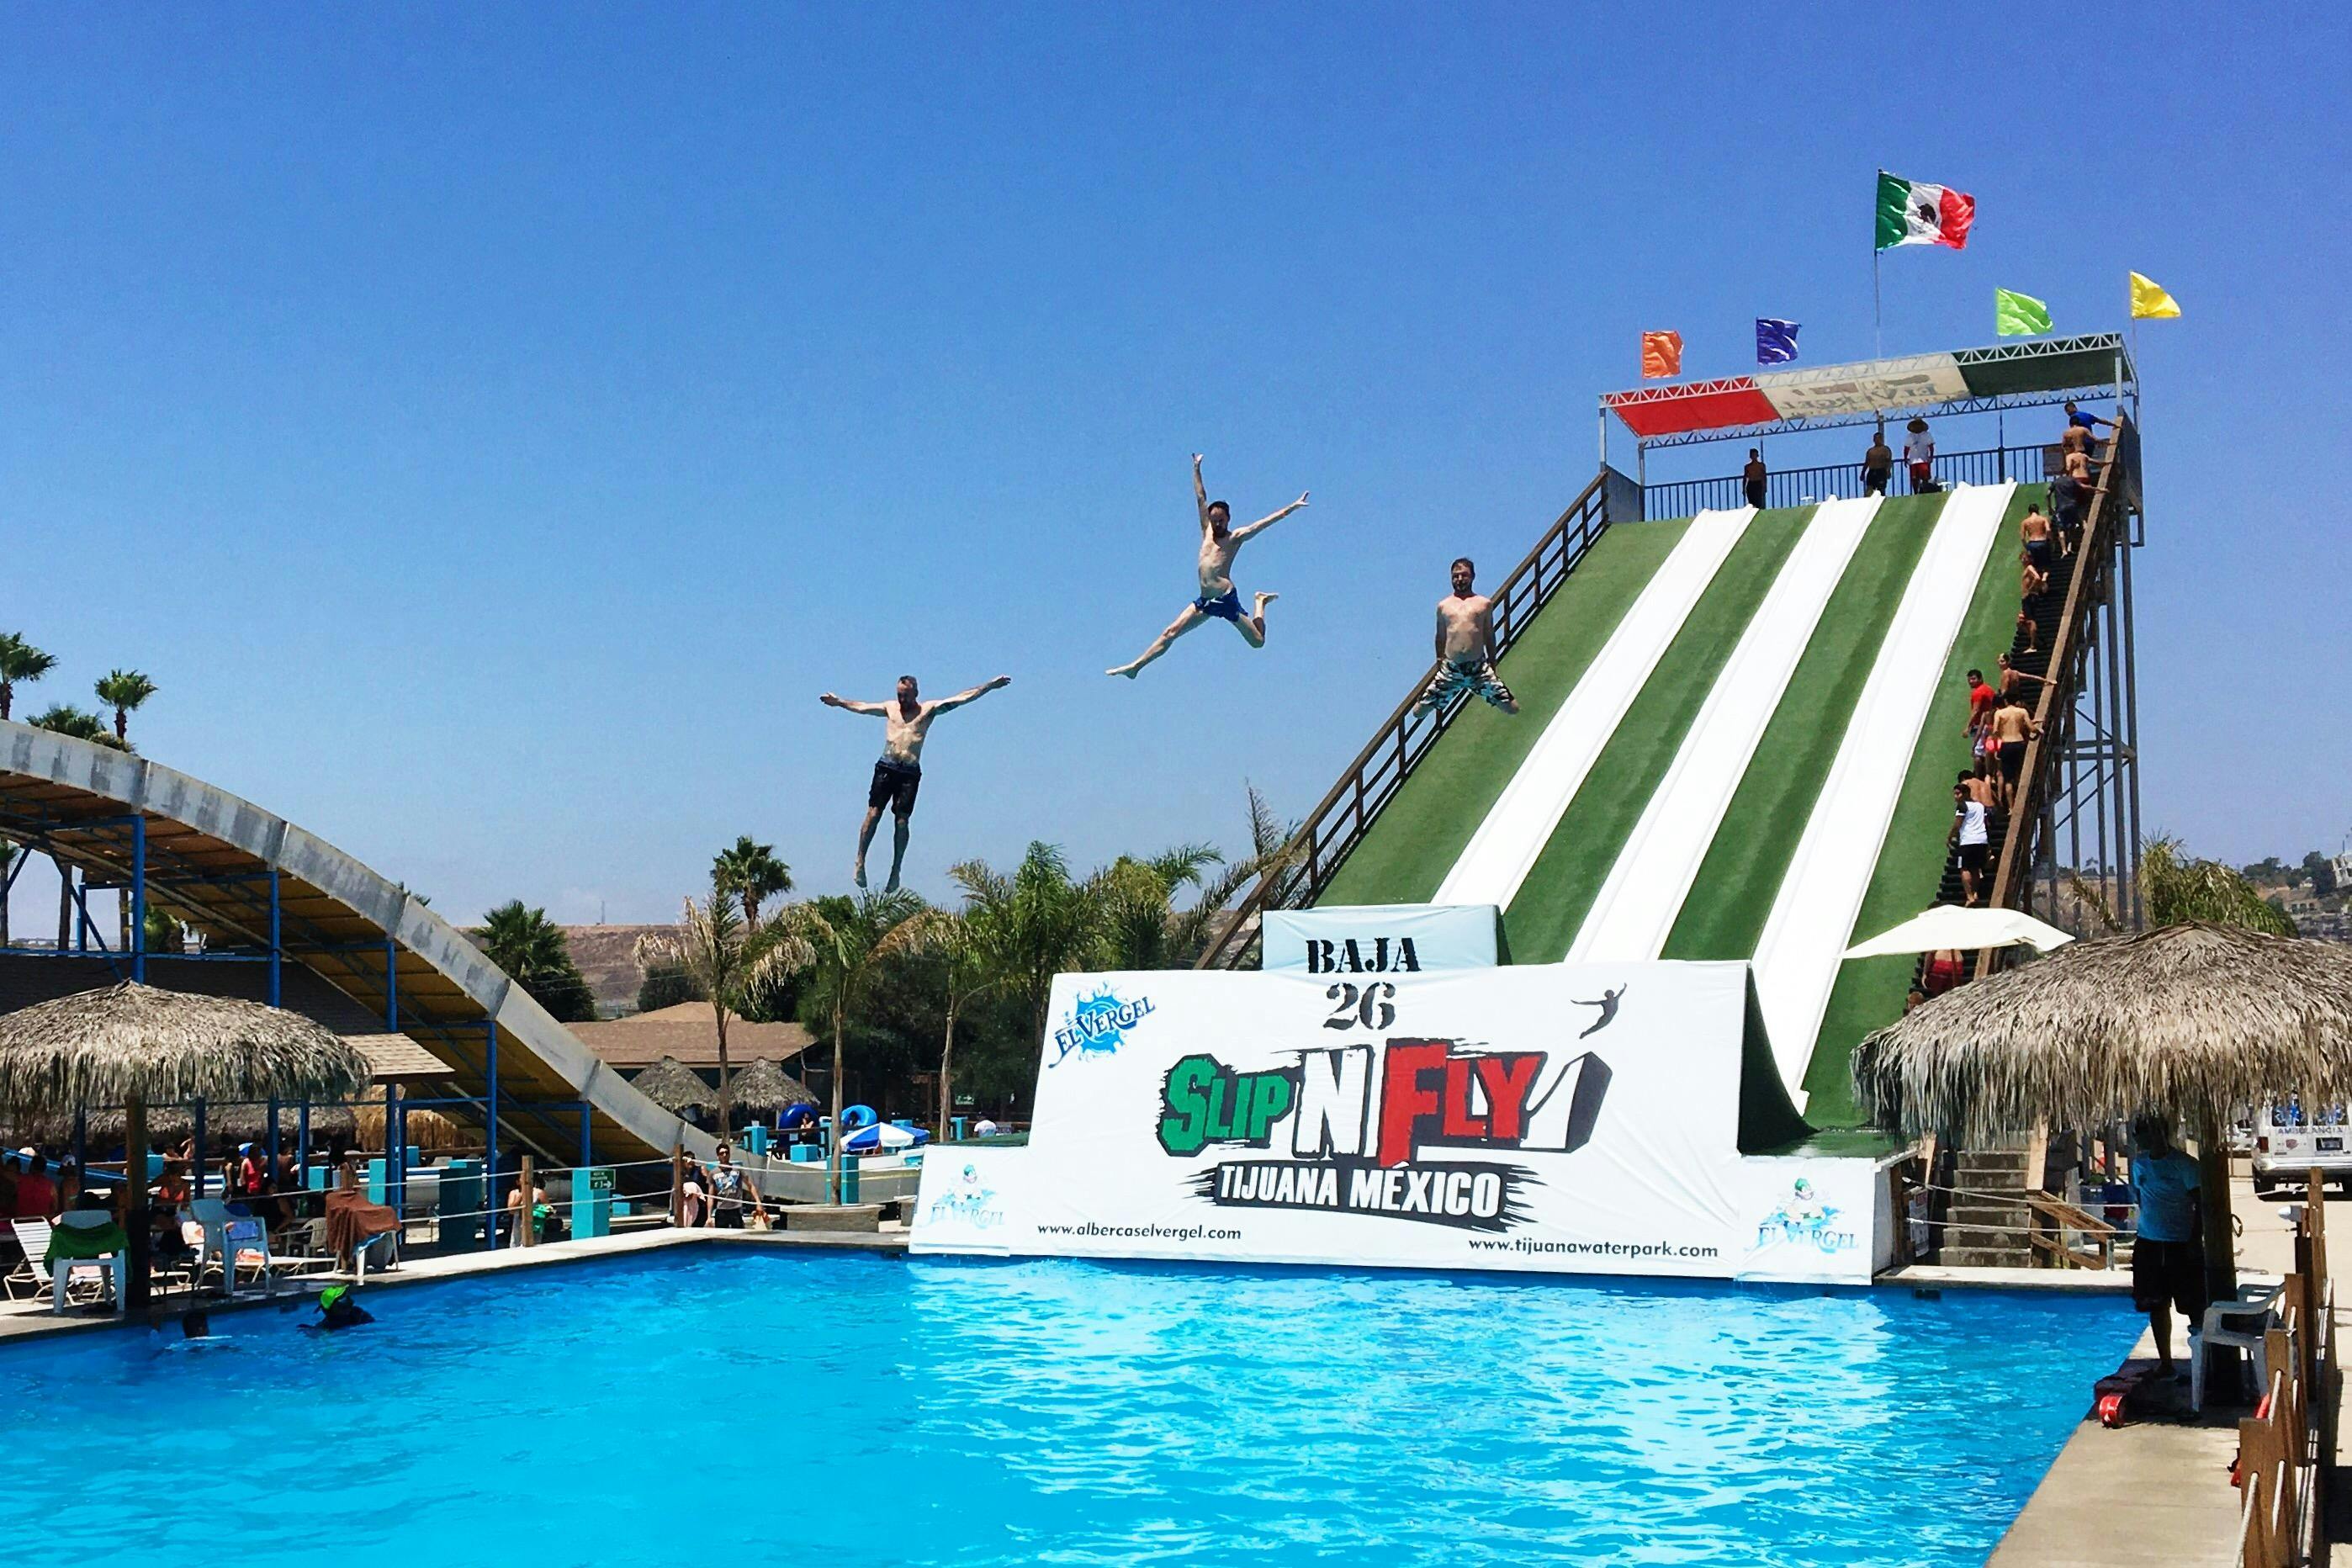 Waterslides that should probably require helmets but everyone rides face fi...